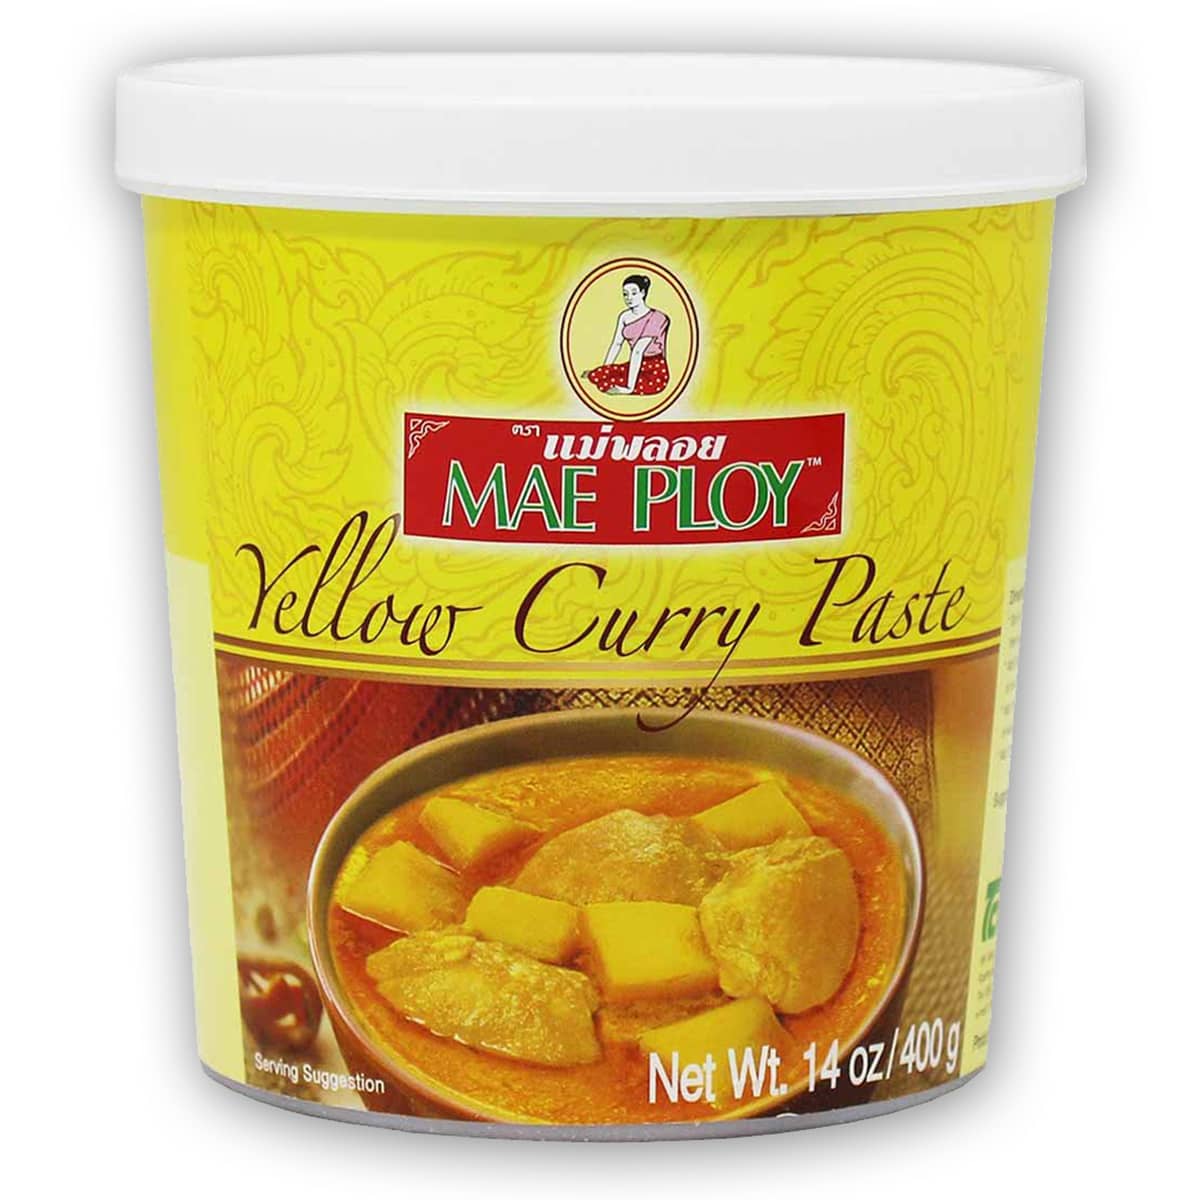 Buy Mae Ploy Yellow Curry Paste - 400 gm